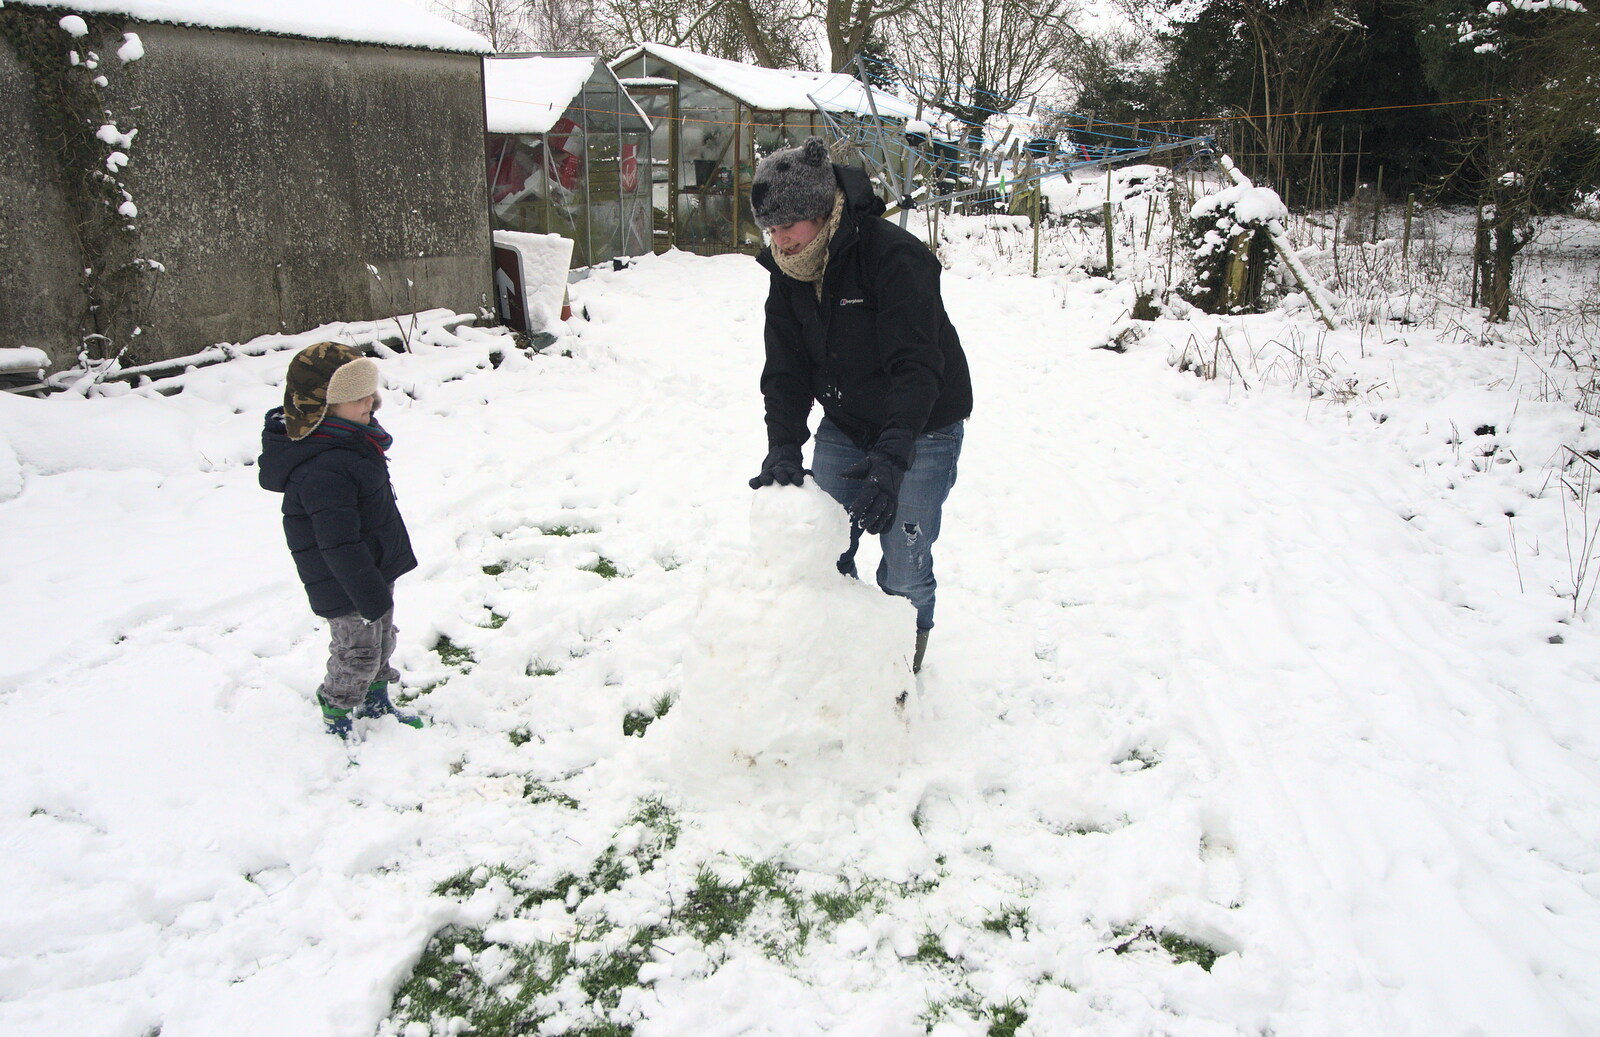 More Snow Days and a Wind Turbine is Built, Brome, Suffolk - 19th January 2013: Fred and Isobel build a snowman